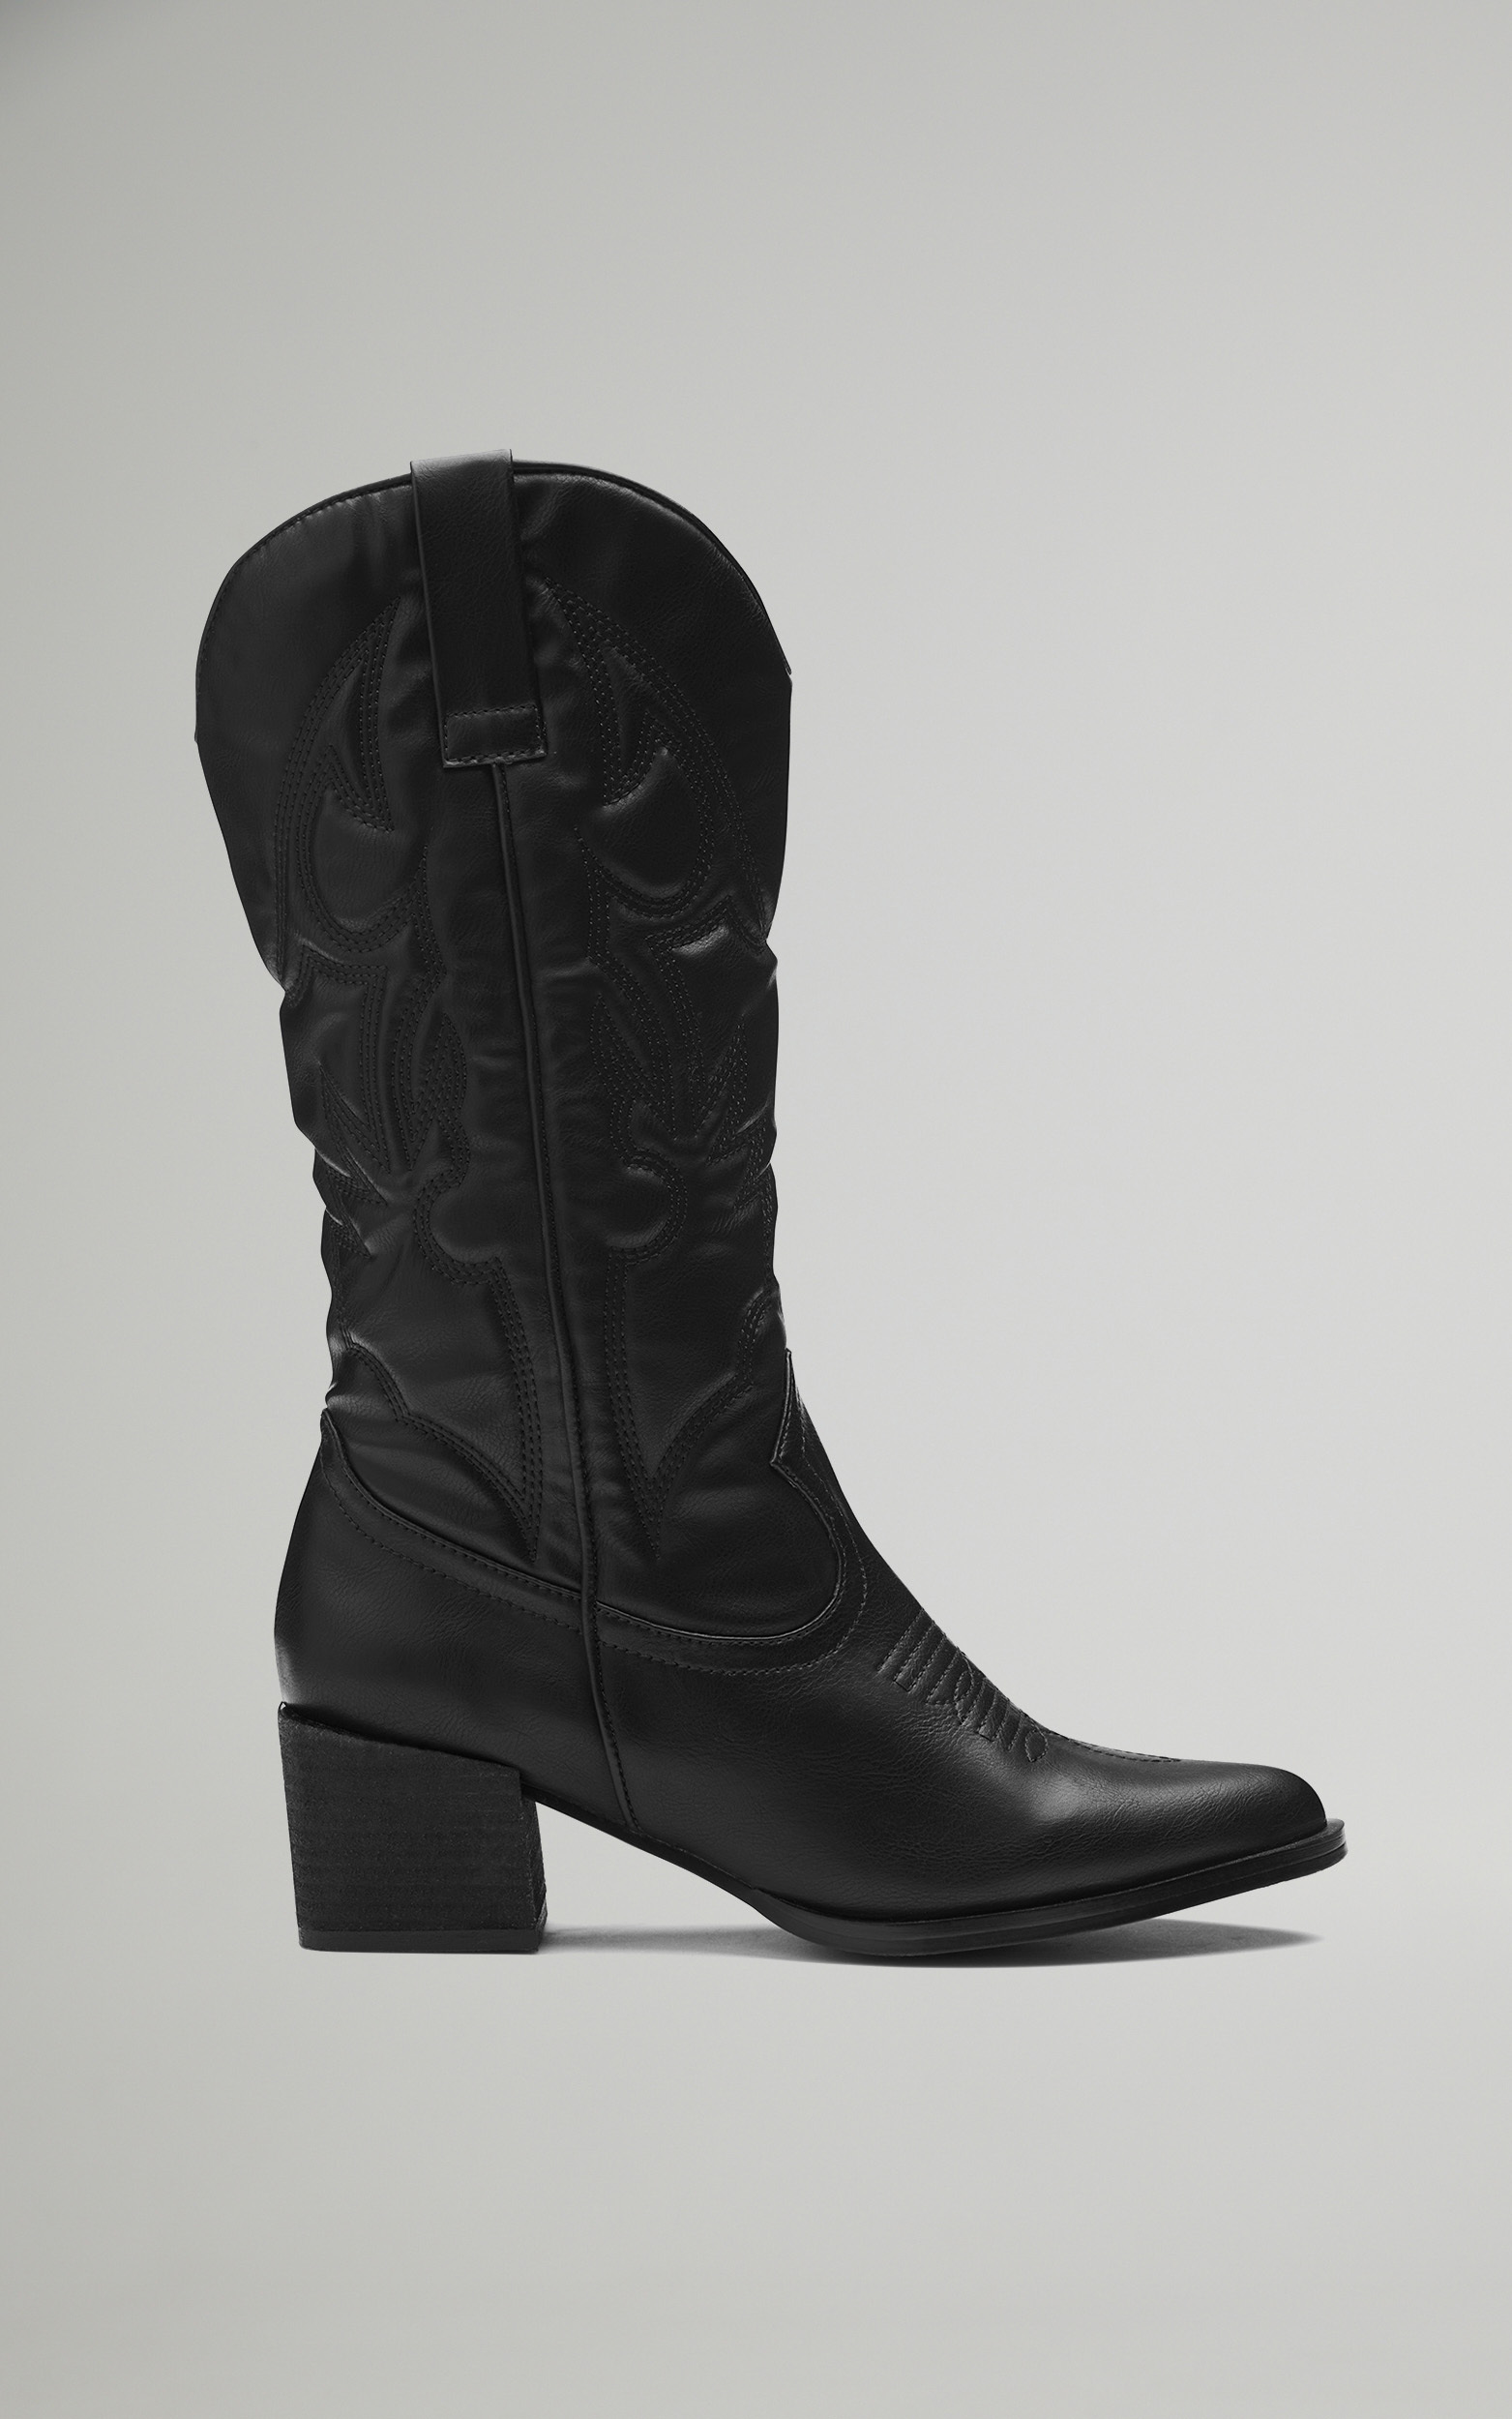 Therapy - Ranger Boots in Black - 05, BLK1, hi-res image number null